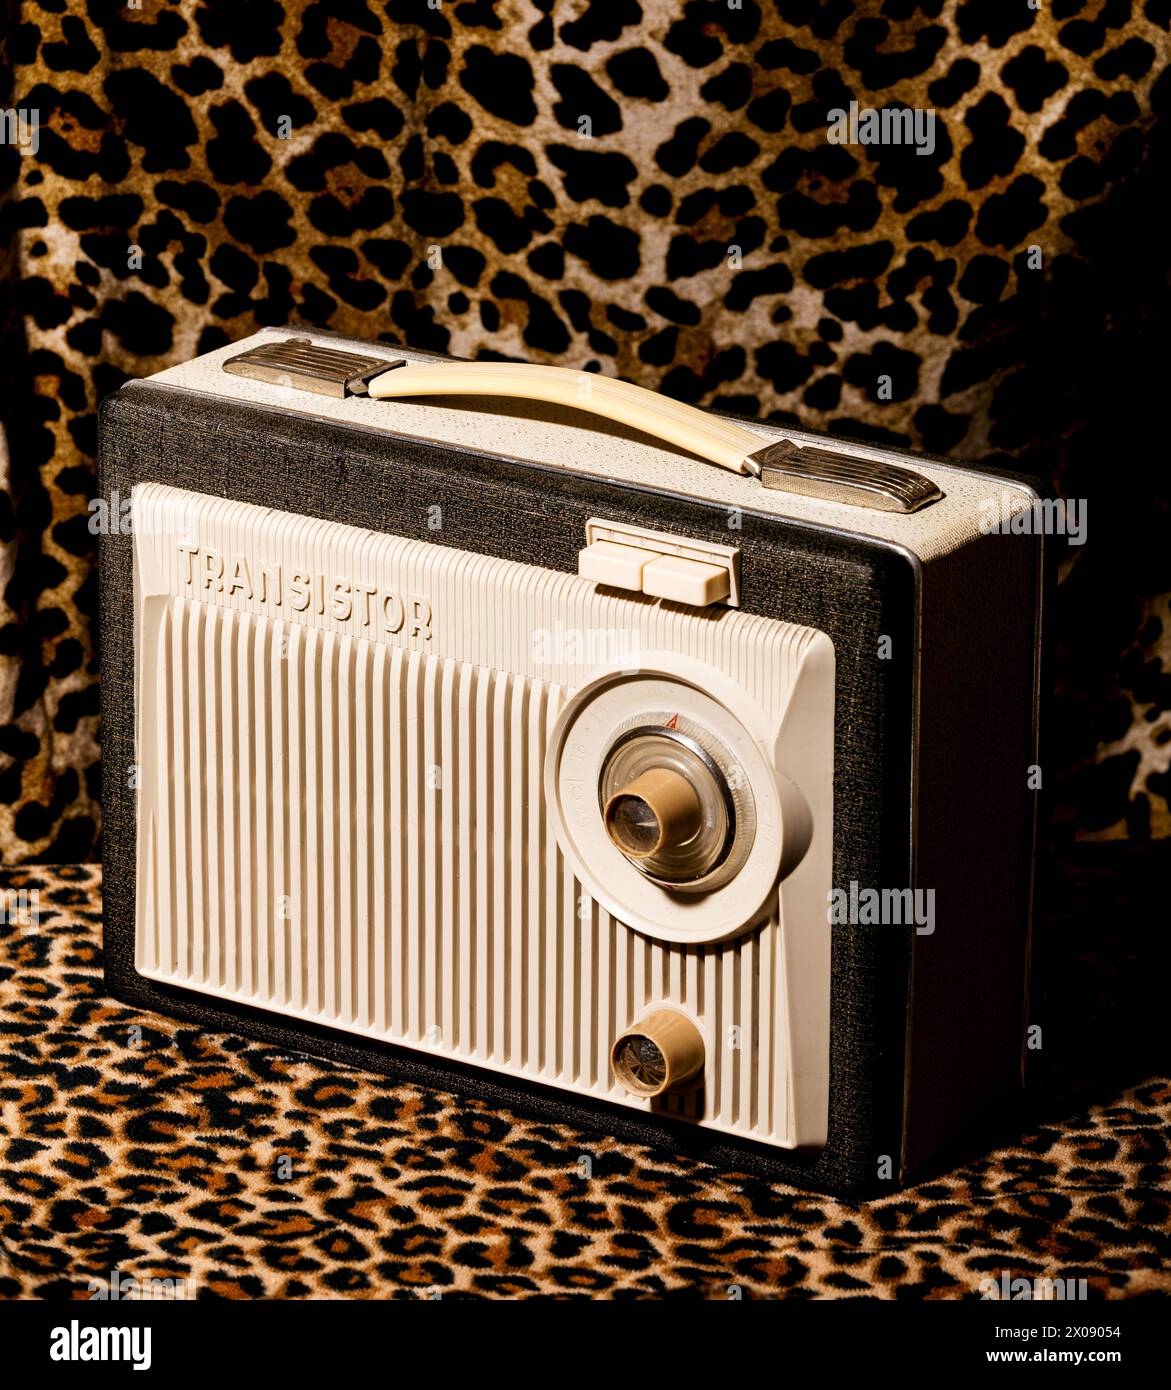 A retro-styled transistor radio with a classic design stands out against a bold leopard print fabric, evoking a nostalgic mid-20th-century aesthetic. Stock Photo